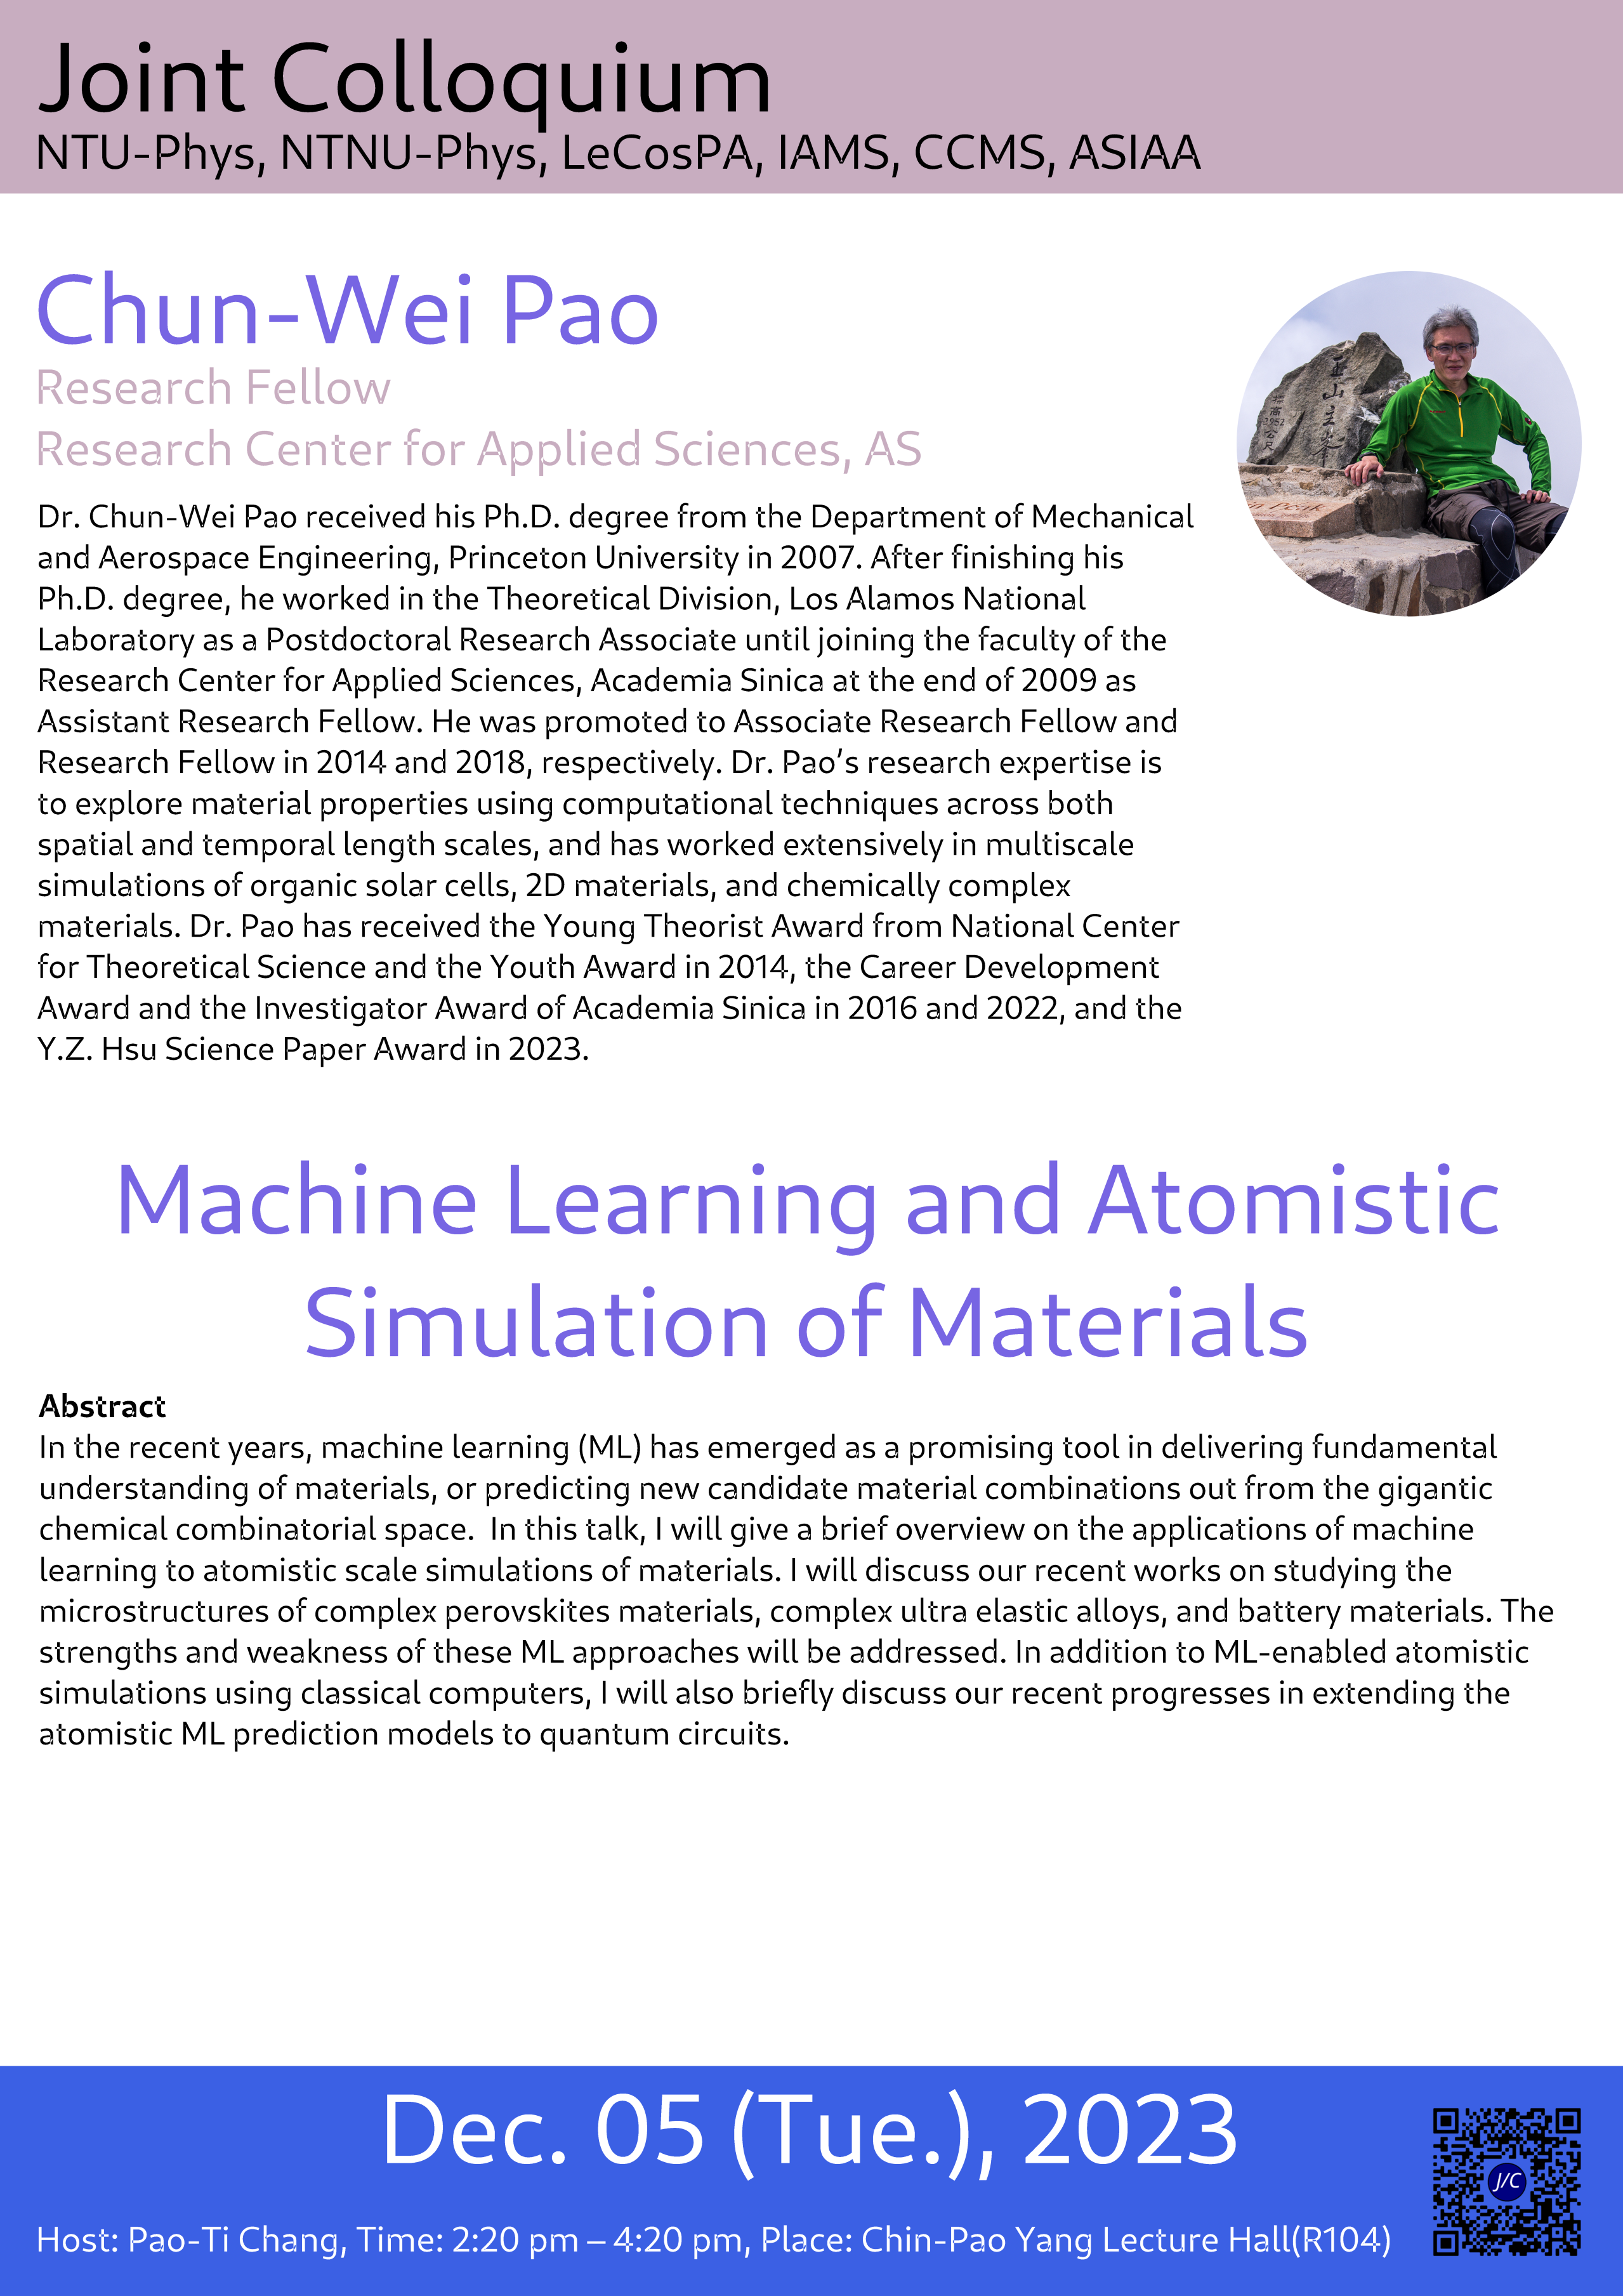 Machine Learning and Atomistic Simulation of Materials